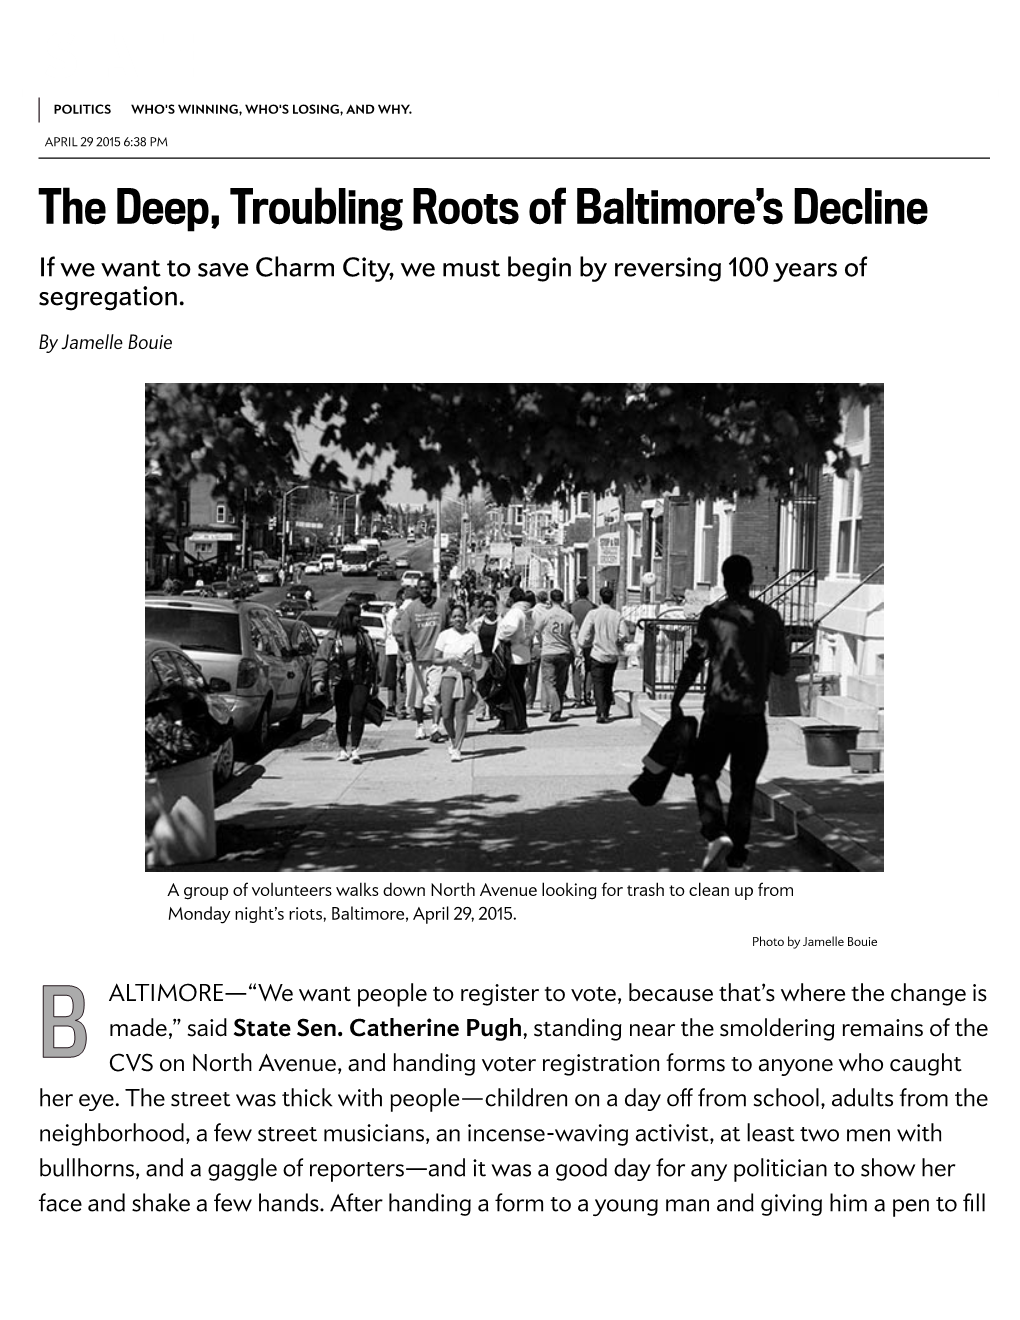 The Deep, Troubling Roots of Baltimore's Decline